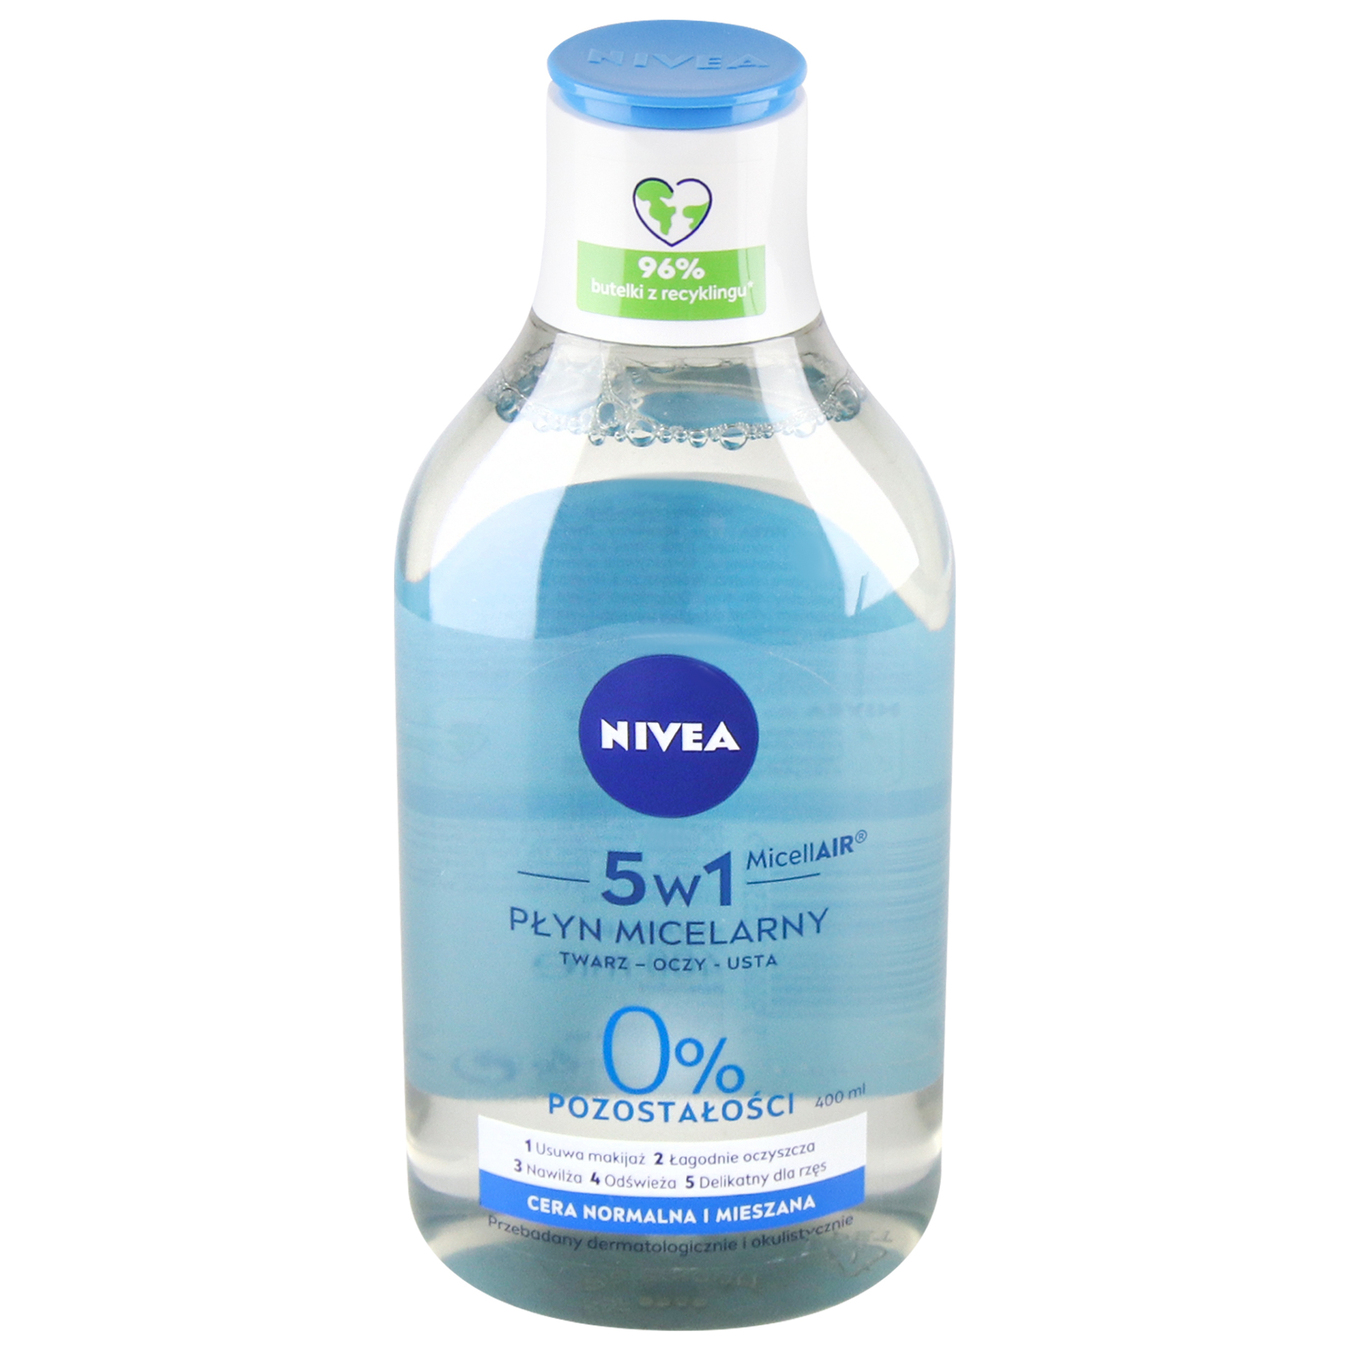 Nivea micellar water for removing make-up 3 in 1 400ml 2